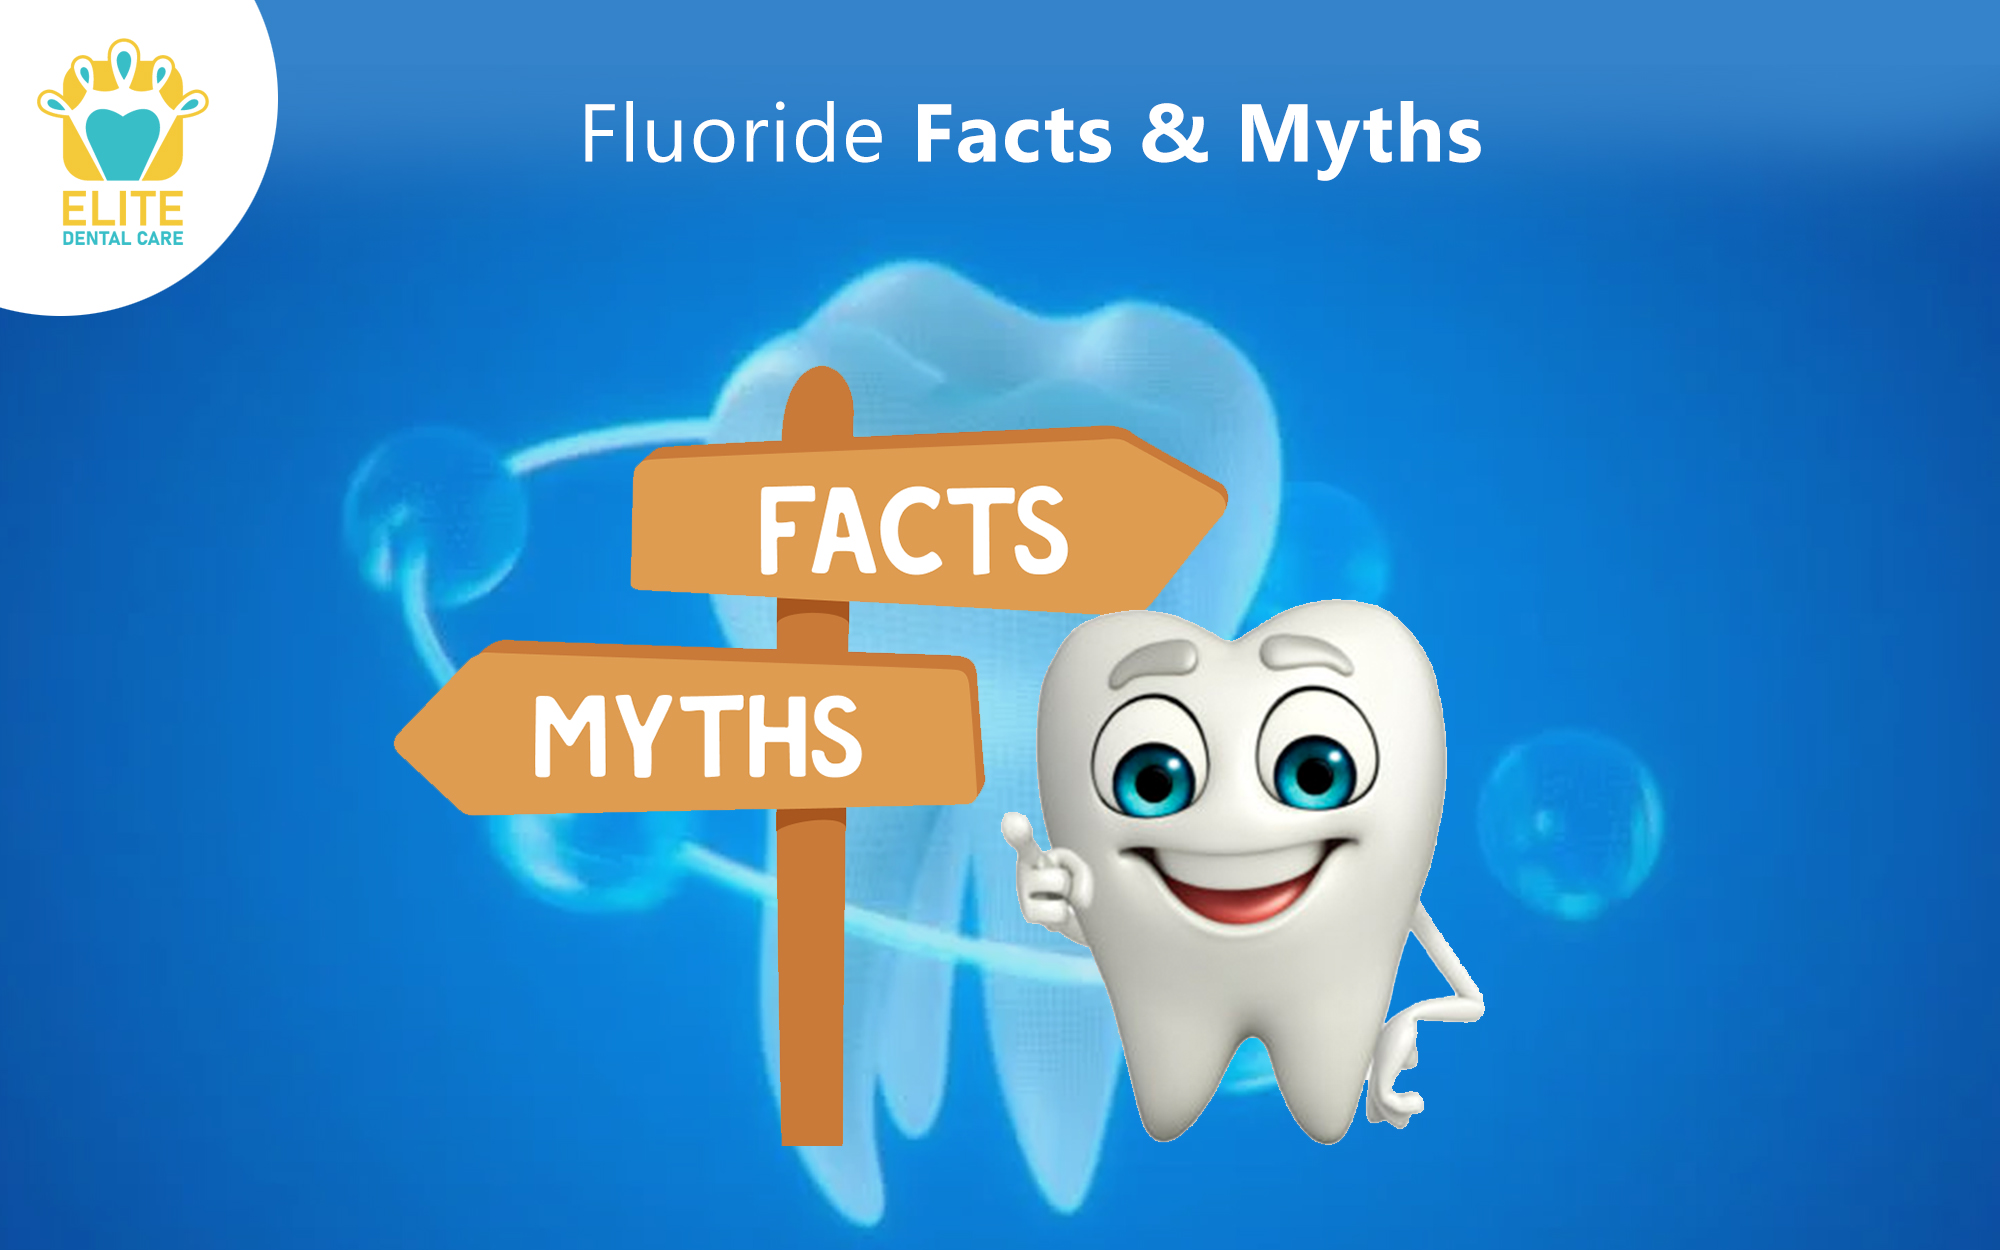 FLUORIDE: FACTS & MYTHS